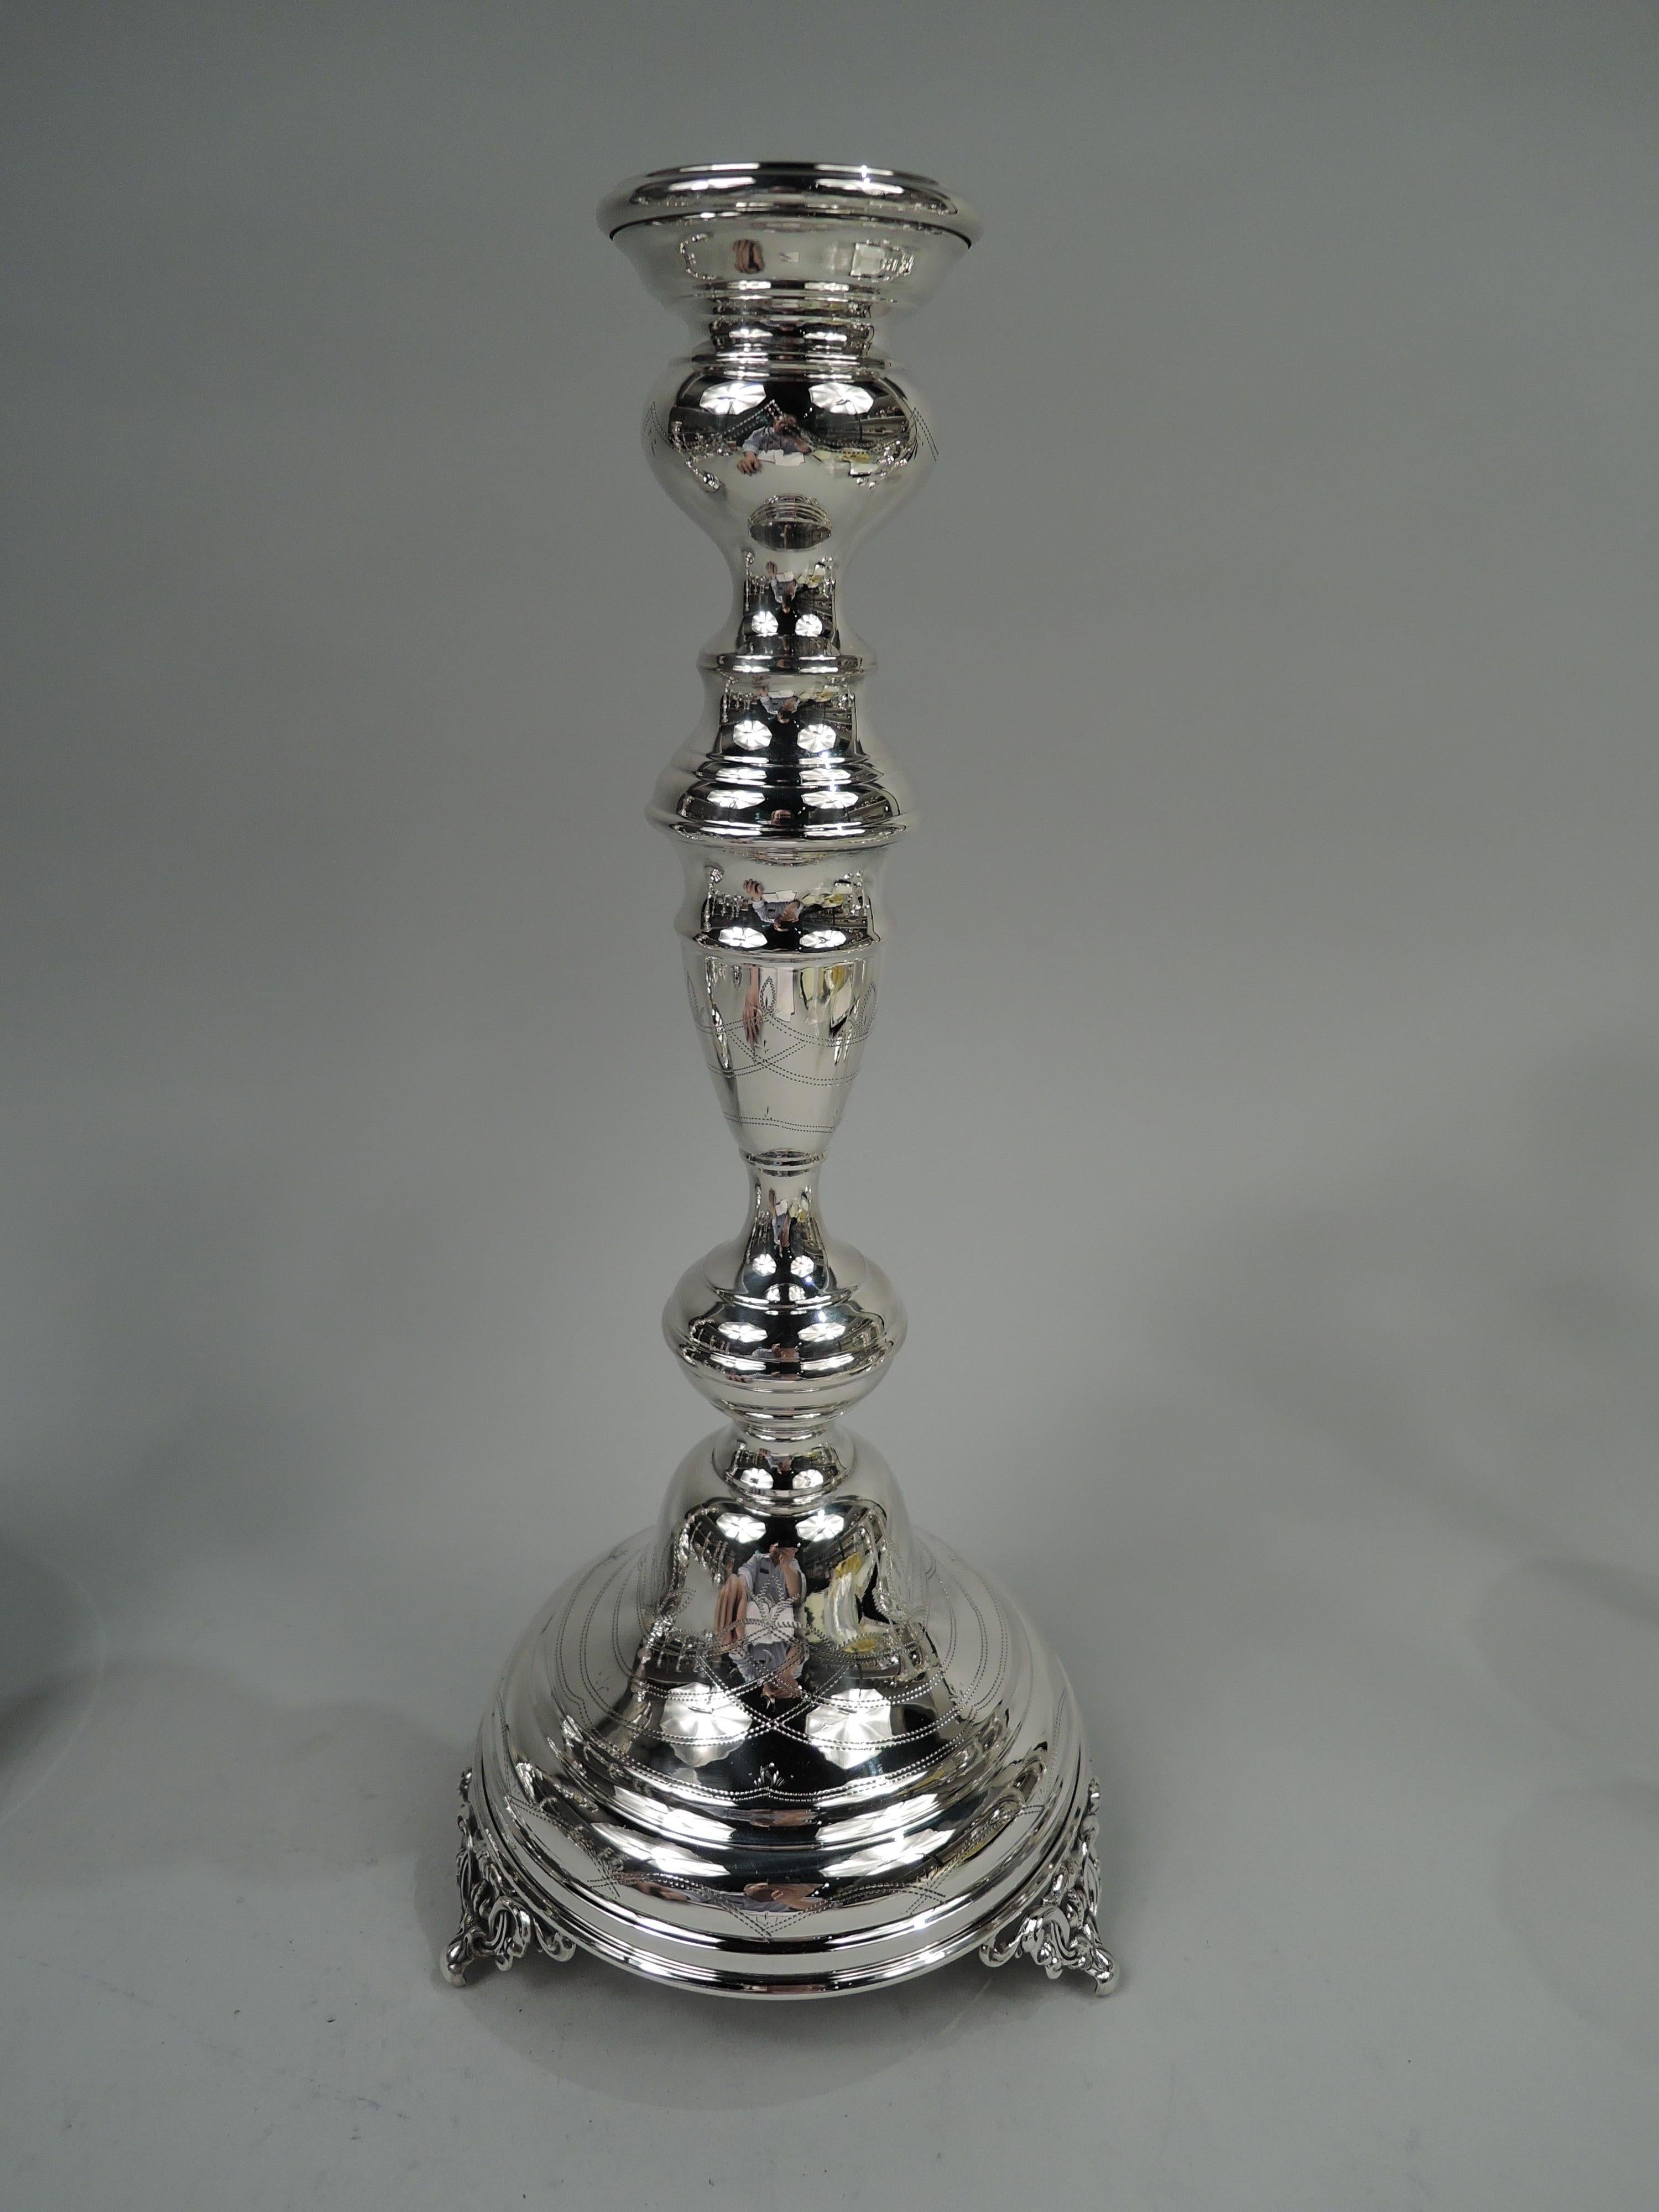 Pair of Old Country sterling silver candlesticks. Made by Elgin Silversmith Co., Inc. in New York, ca 1950. Each: Bellied socket on baluster shaft; domed foot with three embossed scroll supports. Naif-style pointille ornament. Marked “ESCO /